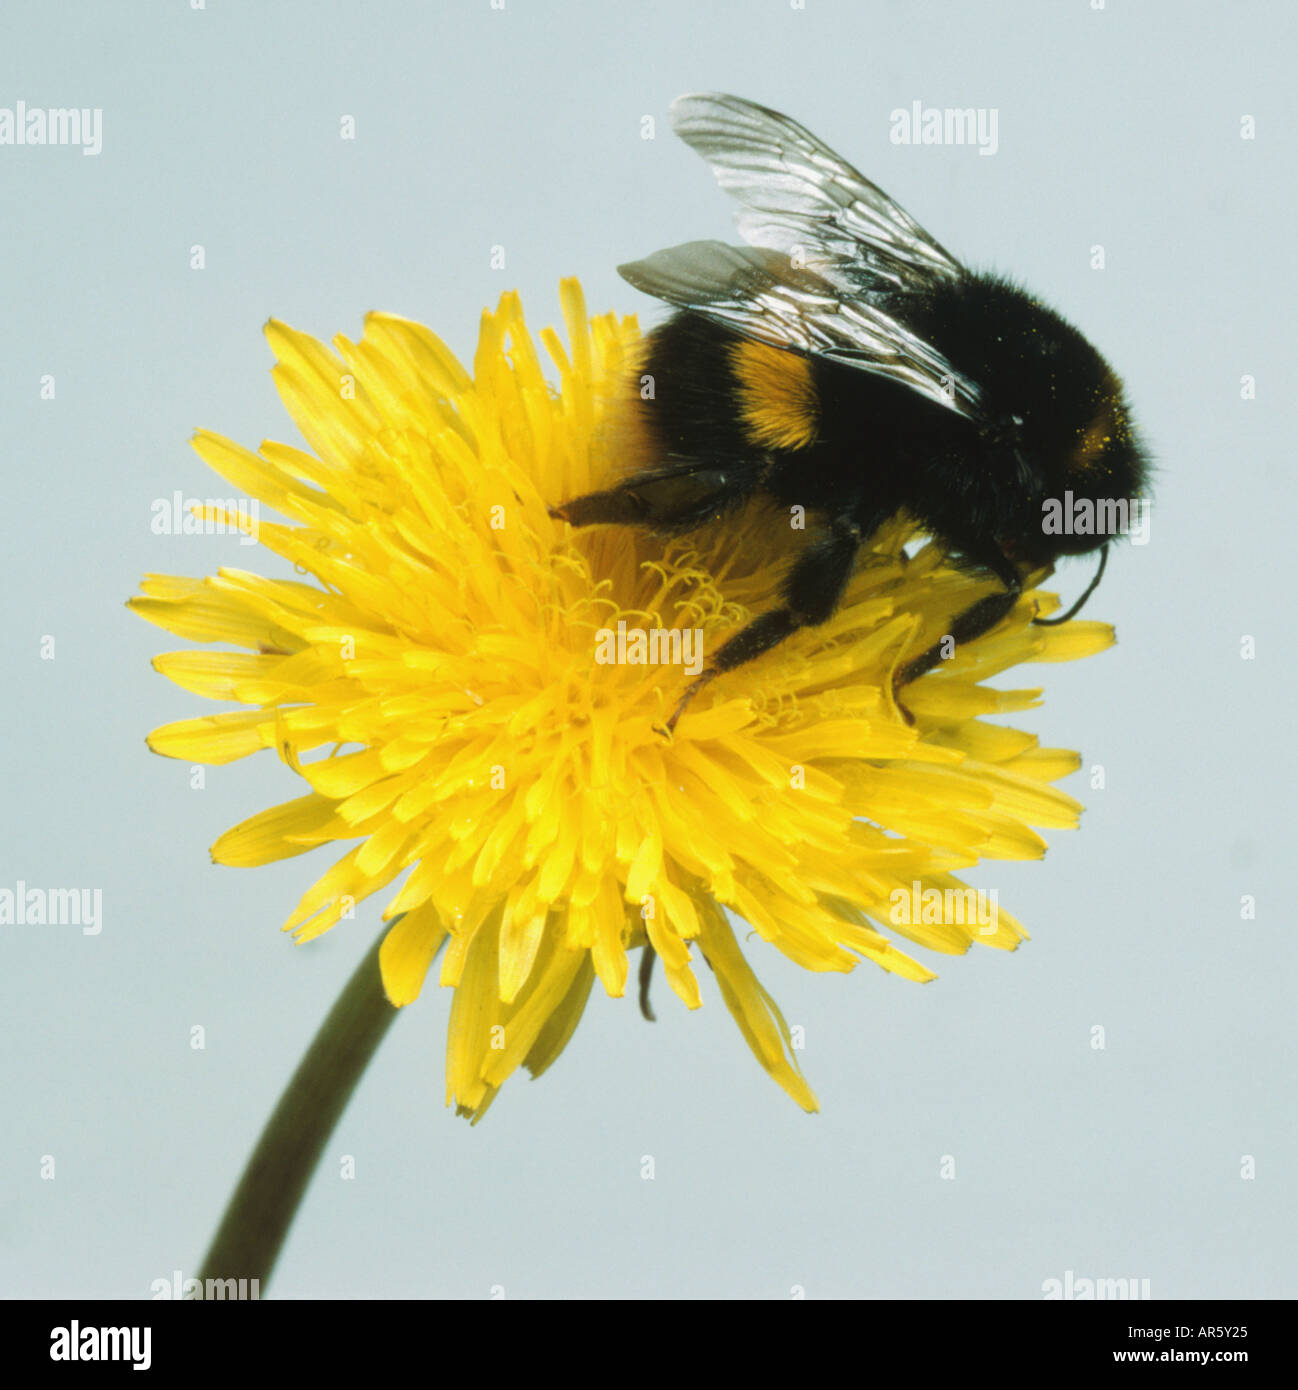 Black and yellow striped bumblebee sitting on dandelion flowerhead, pollinating, angled above view. Stock Photo